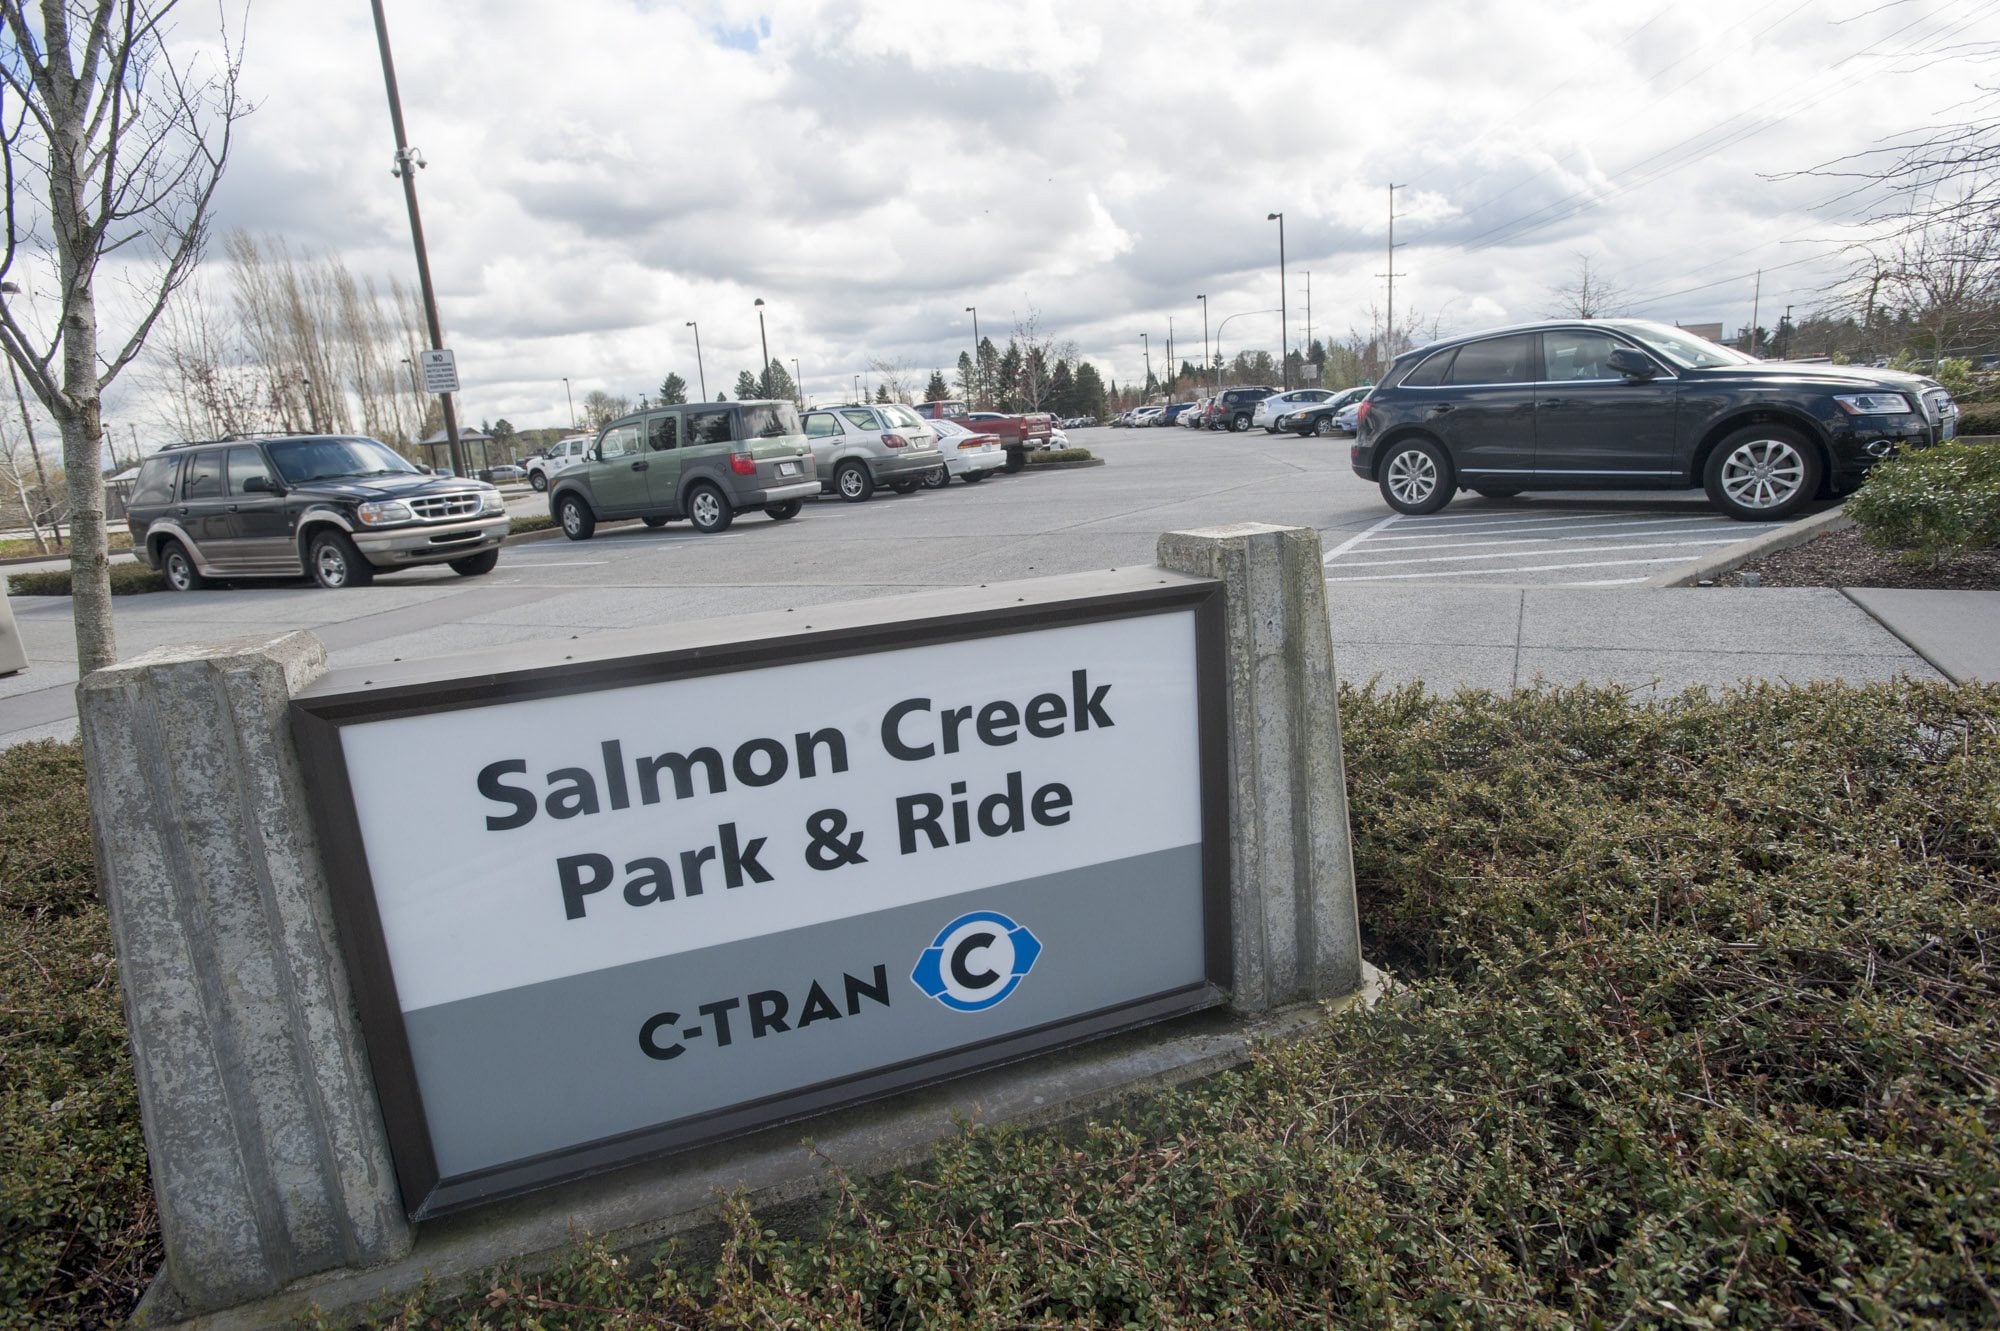 The Salmon Creek Park & Ride was relocated as part of a $133 million traffic project. The relocation both expanded the overtaxed lot and relieved traffic congestion at Northeast 134th Street and Highway 99.